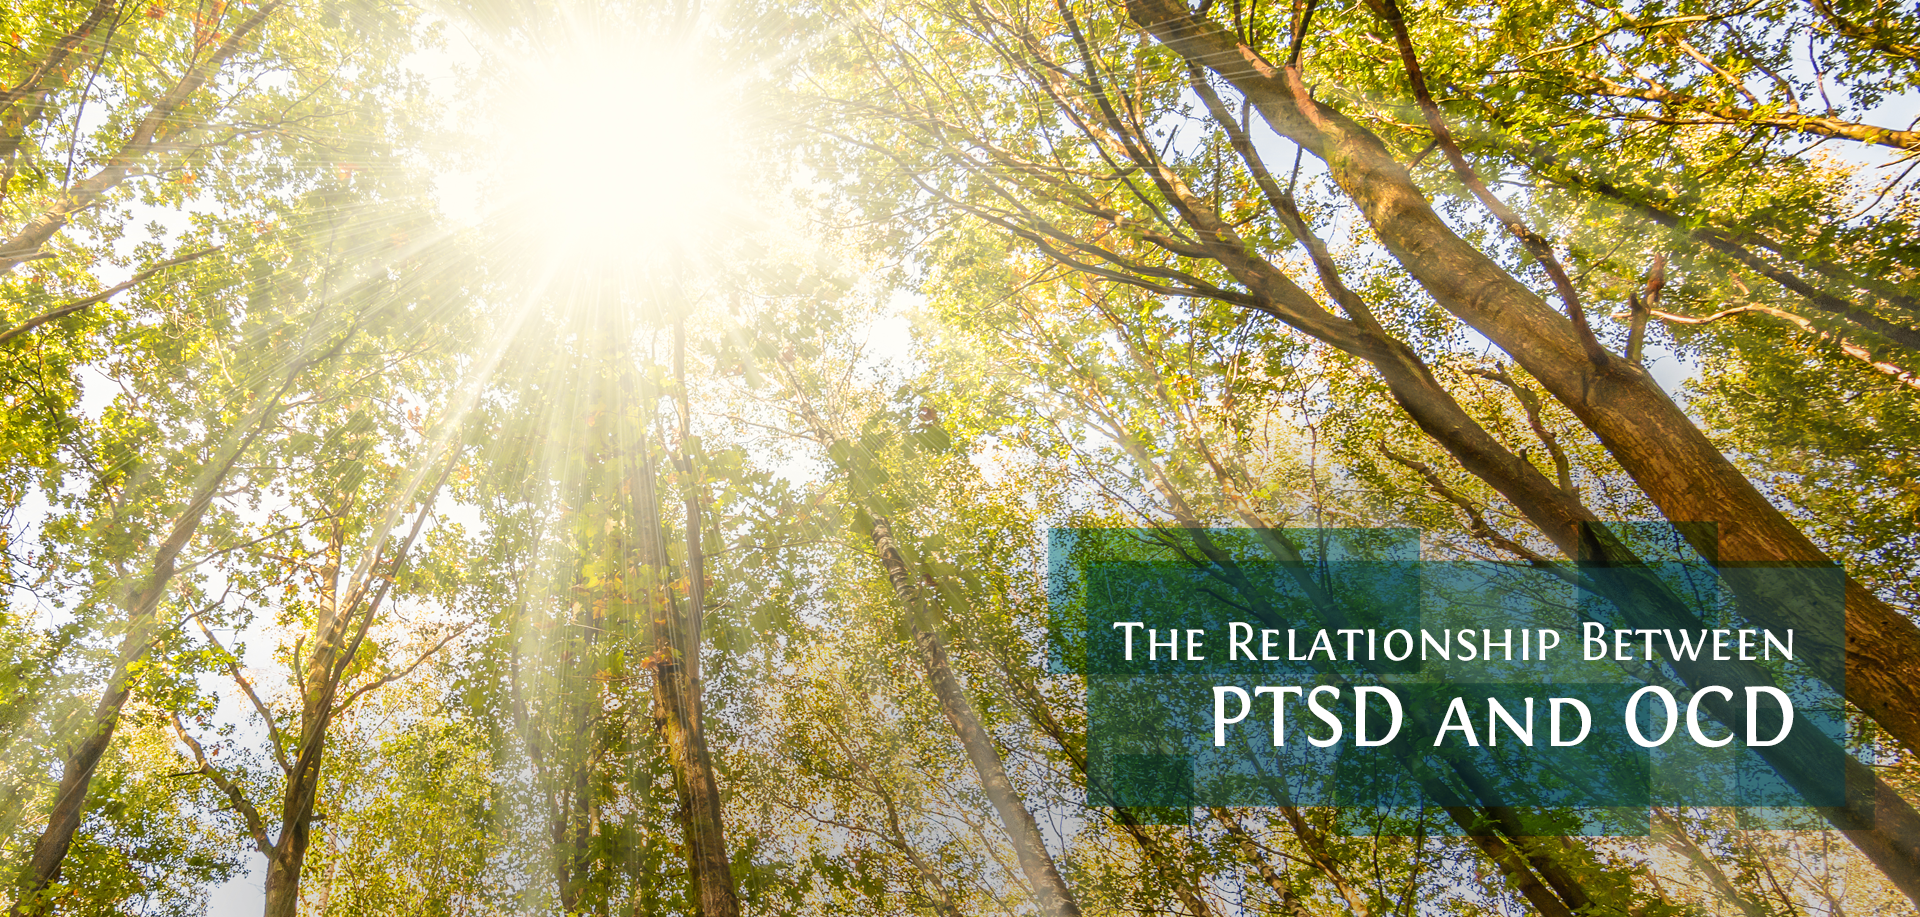 Sunlight shining through trees with text The Relationship Between PTSD and OC